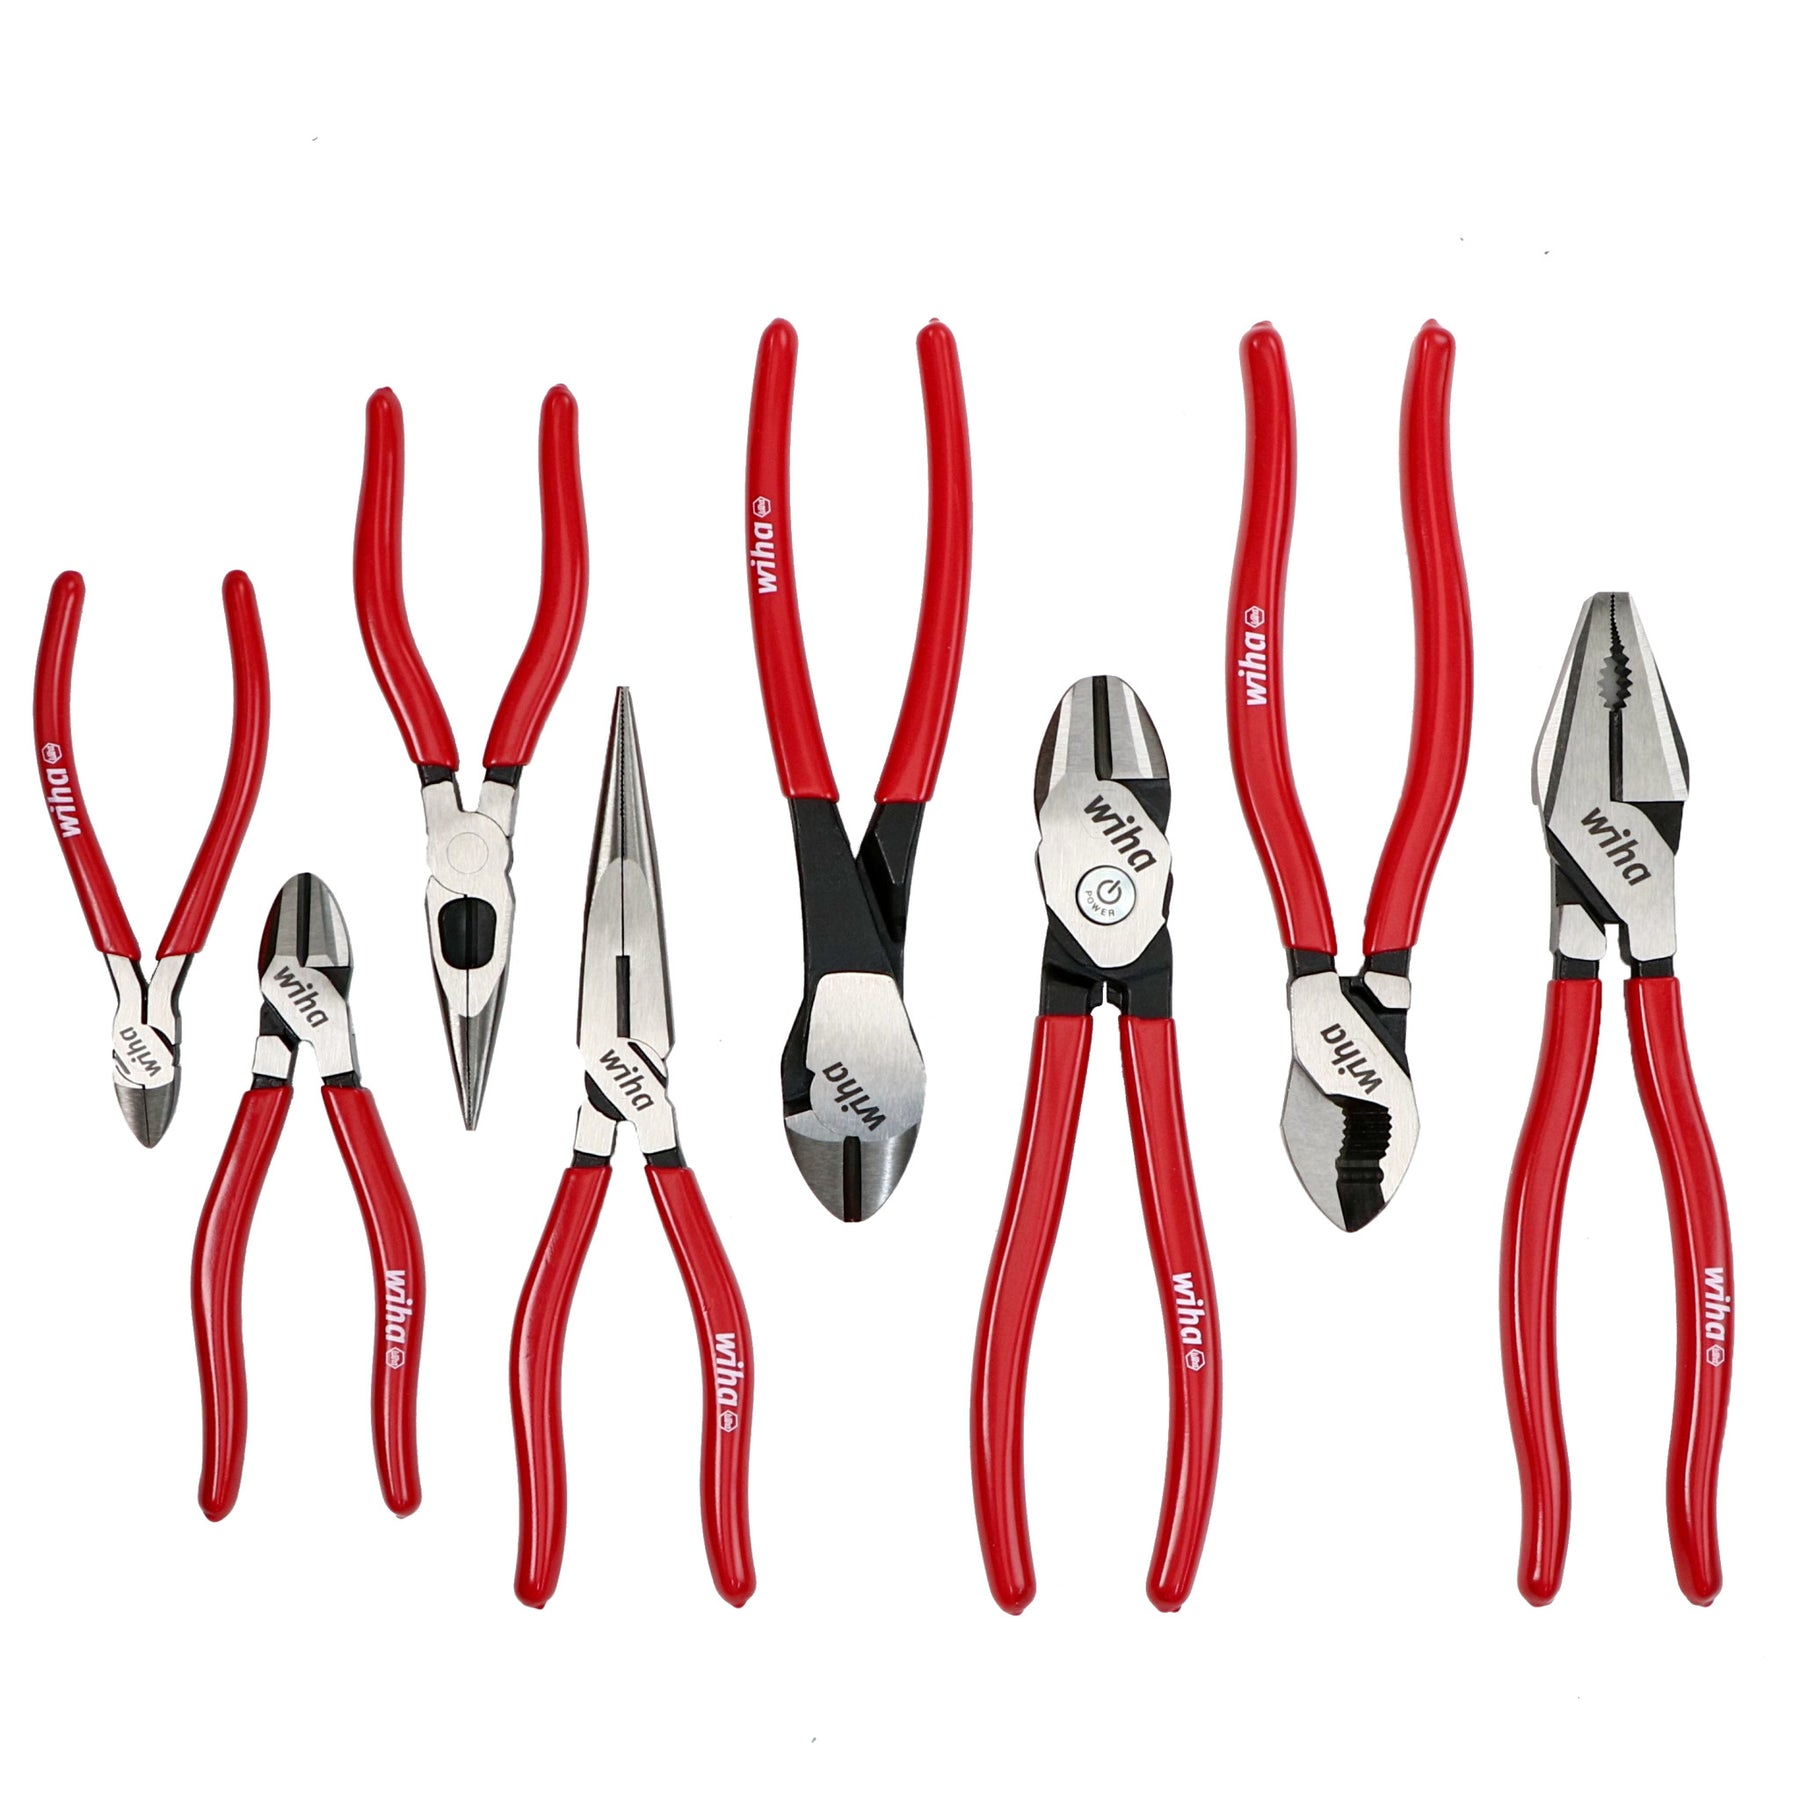 Wiha 34682 - 8 Piece Classic Grip Pliers and Cutters Tray Set